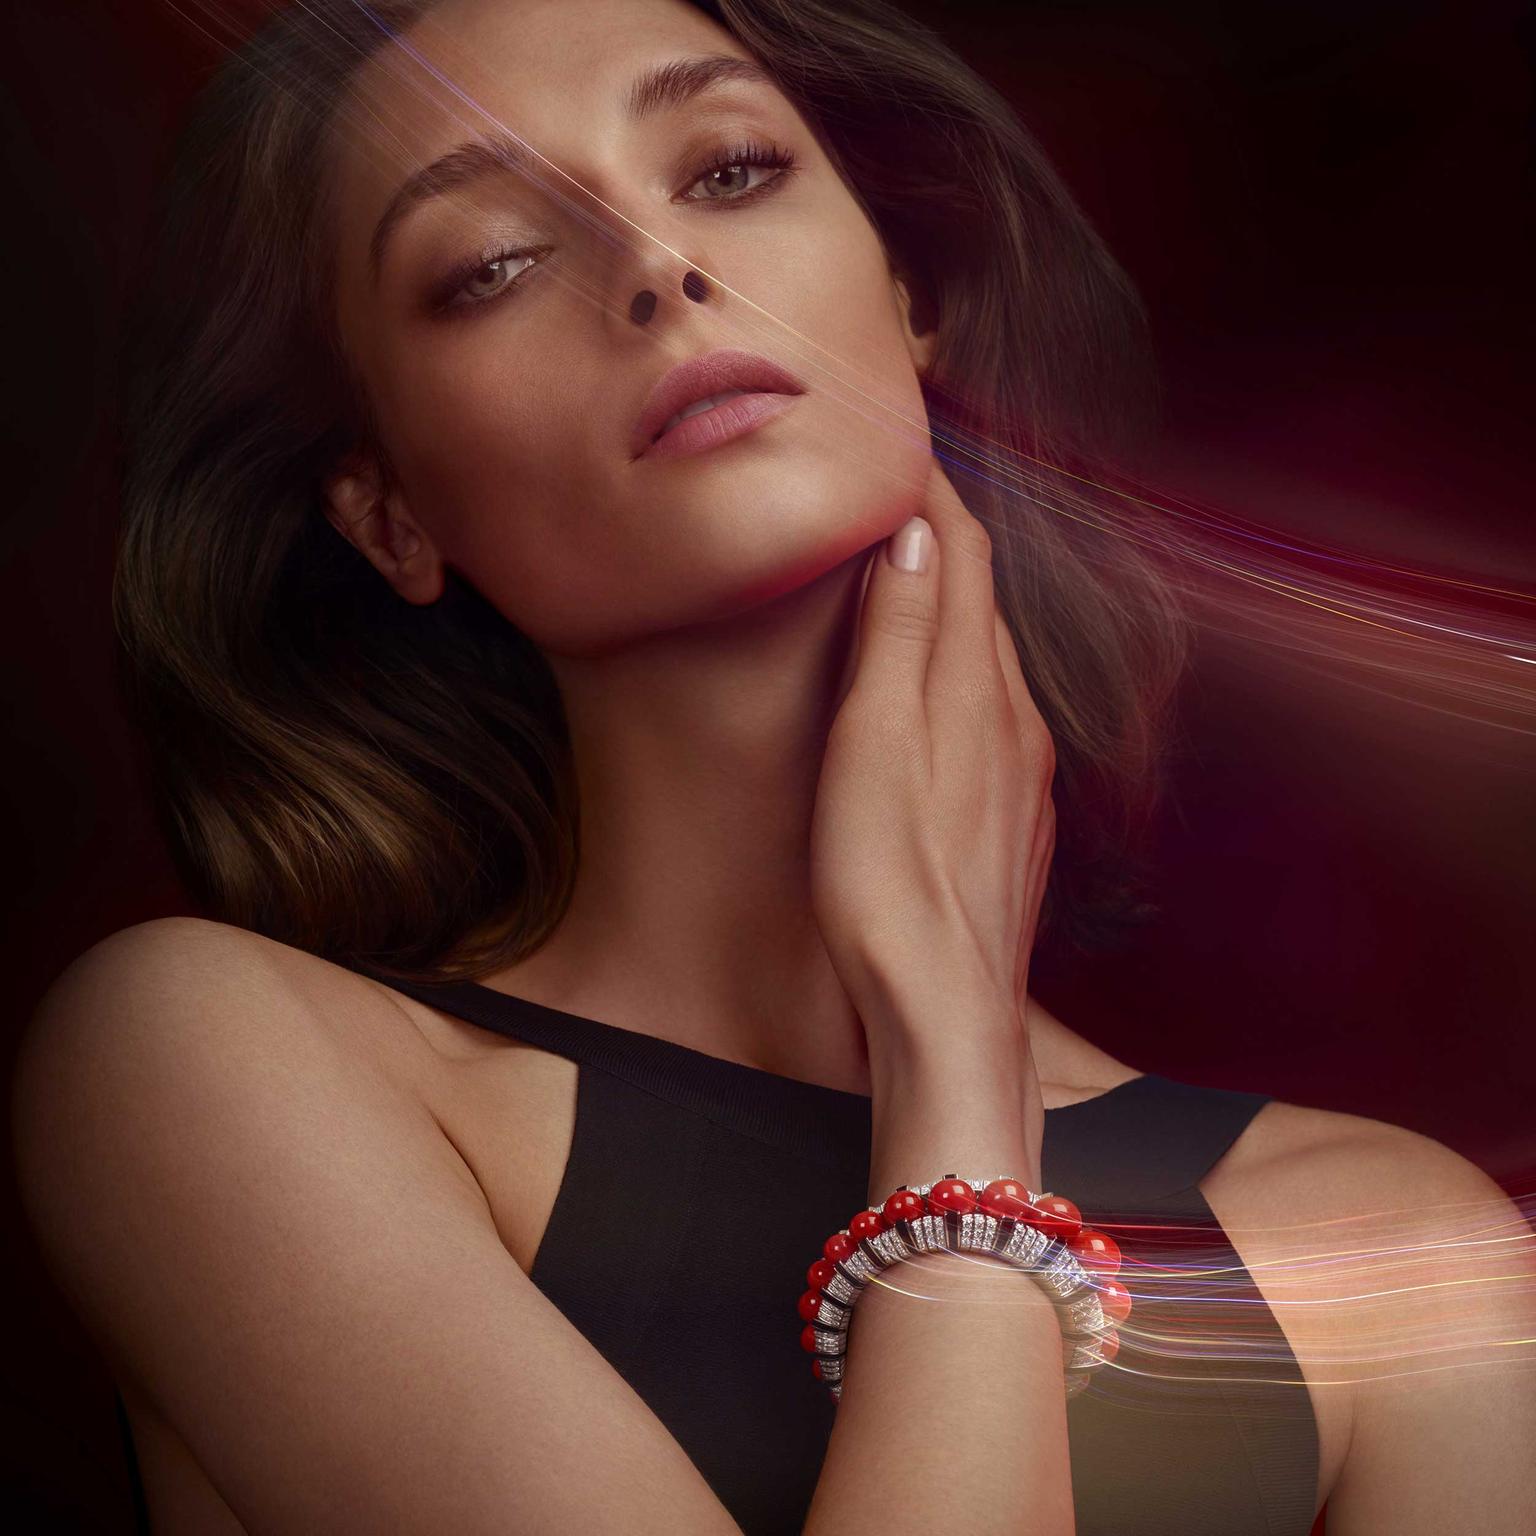 Cartier Orienphonie wristwatch in white gold with red coral beads from Coloratura collection 2018